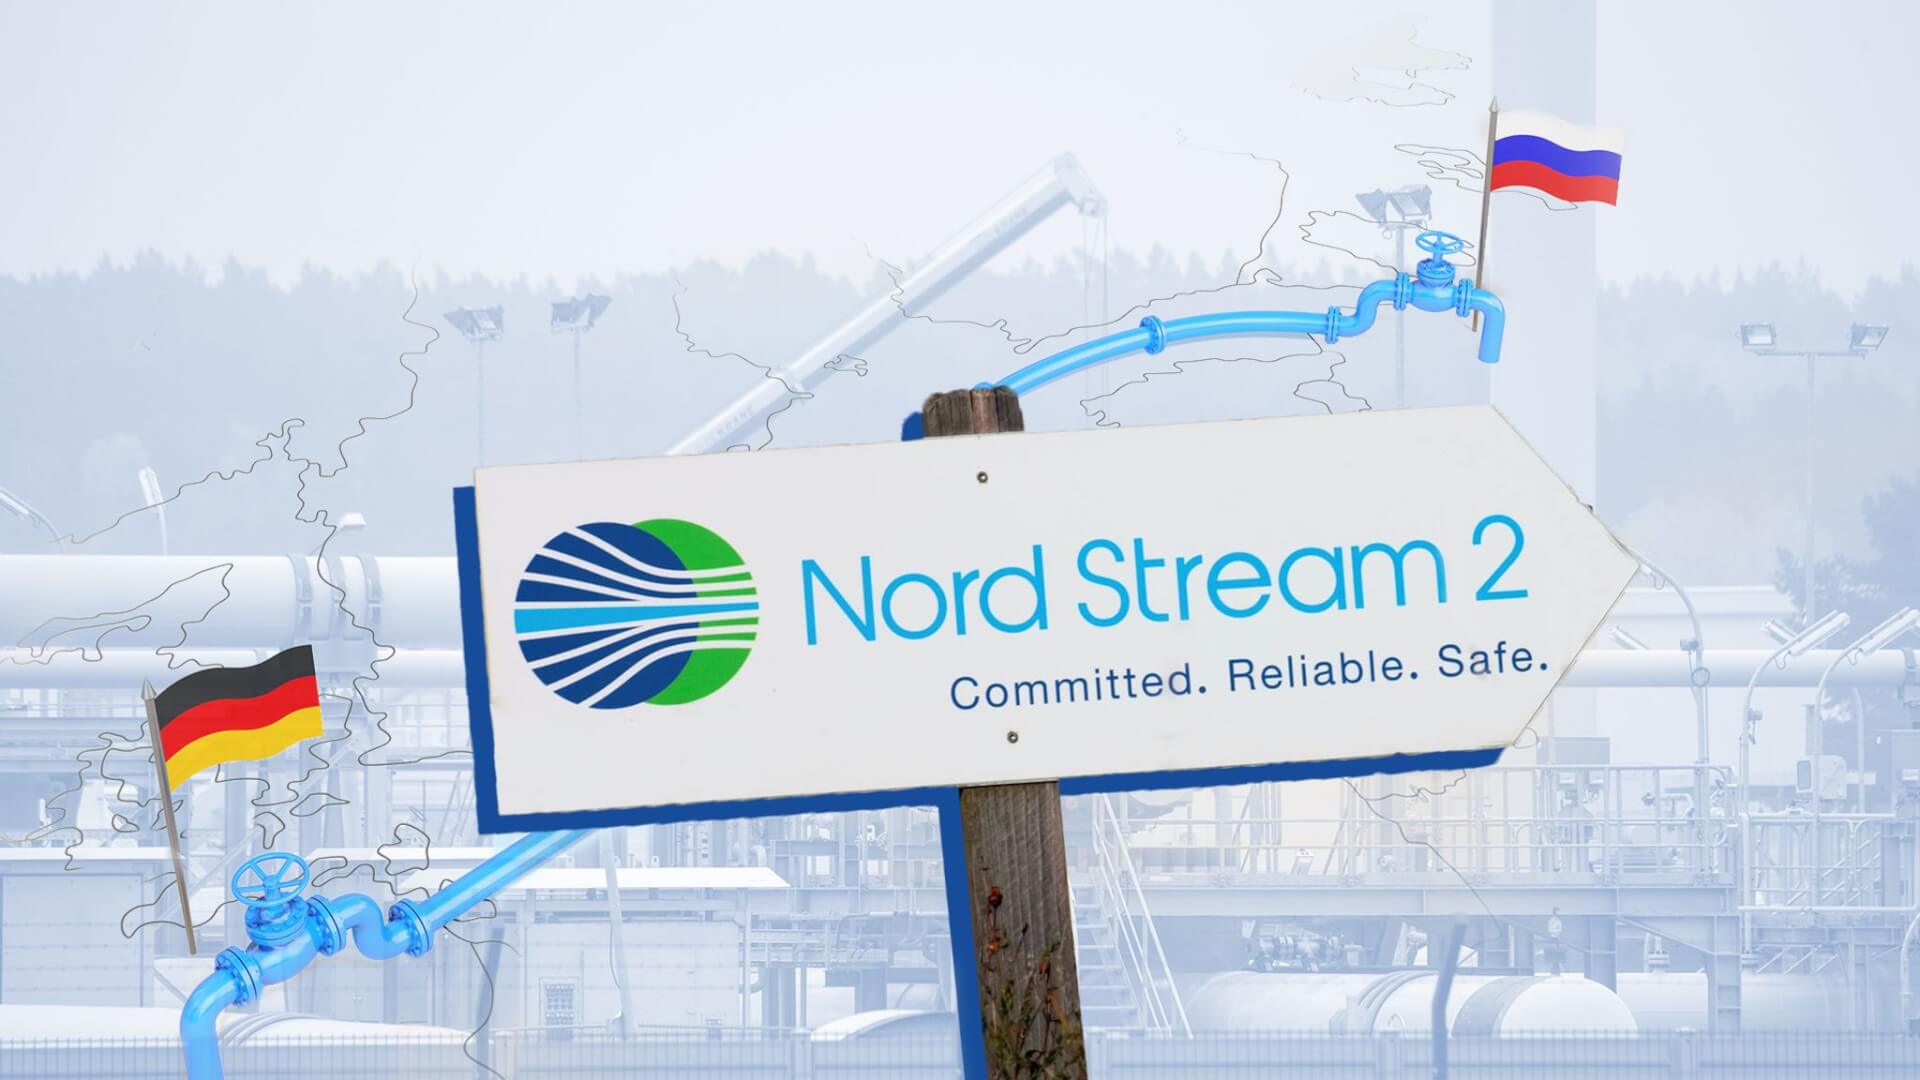 Germany, US Agree to Shut Down Nord Stream 2 if Russia Invades Ukraine